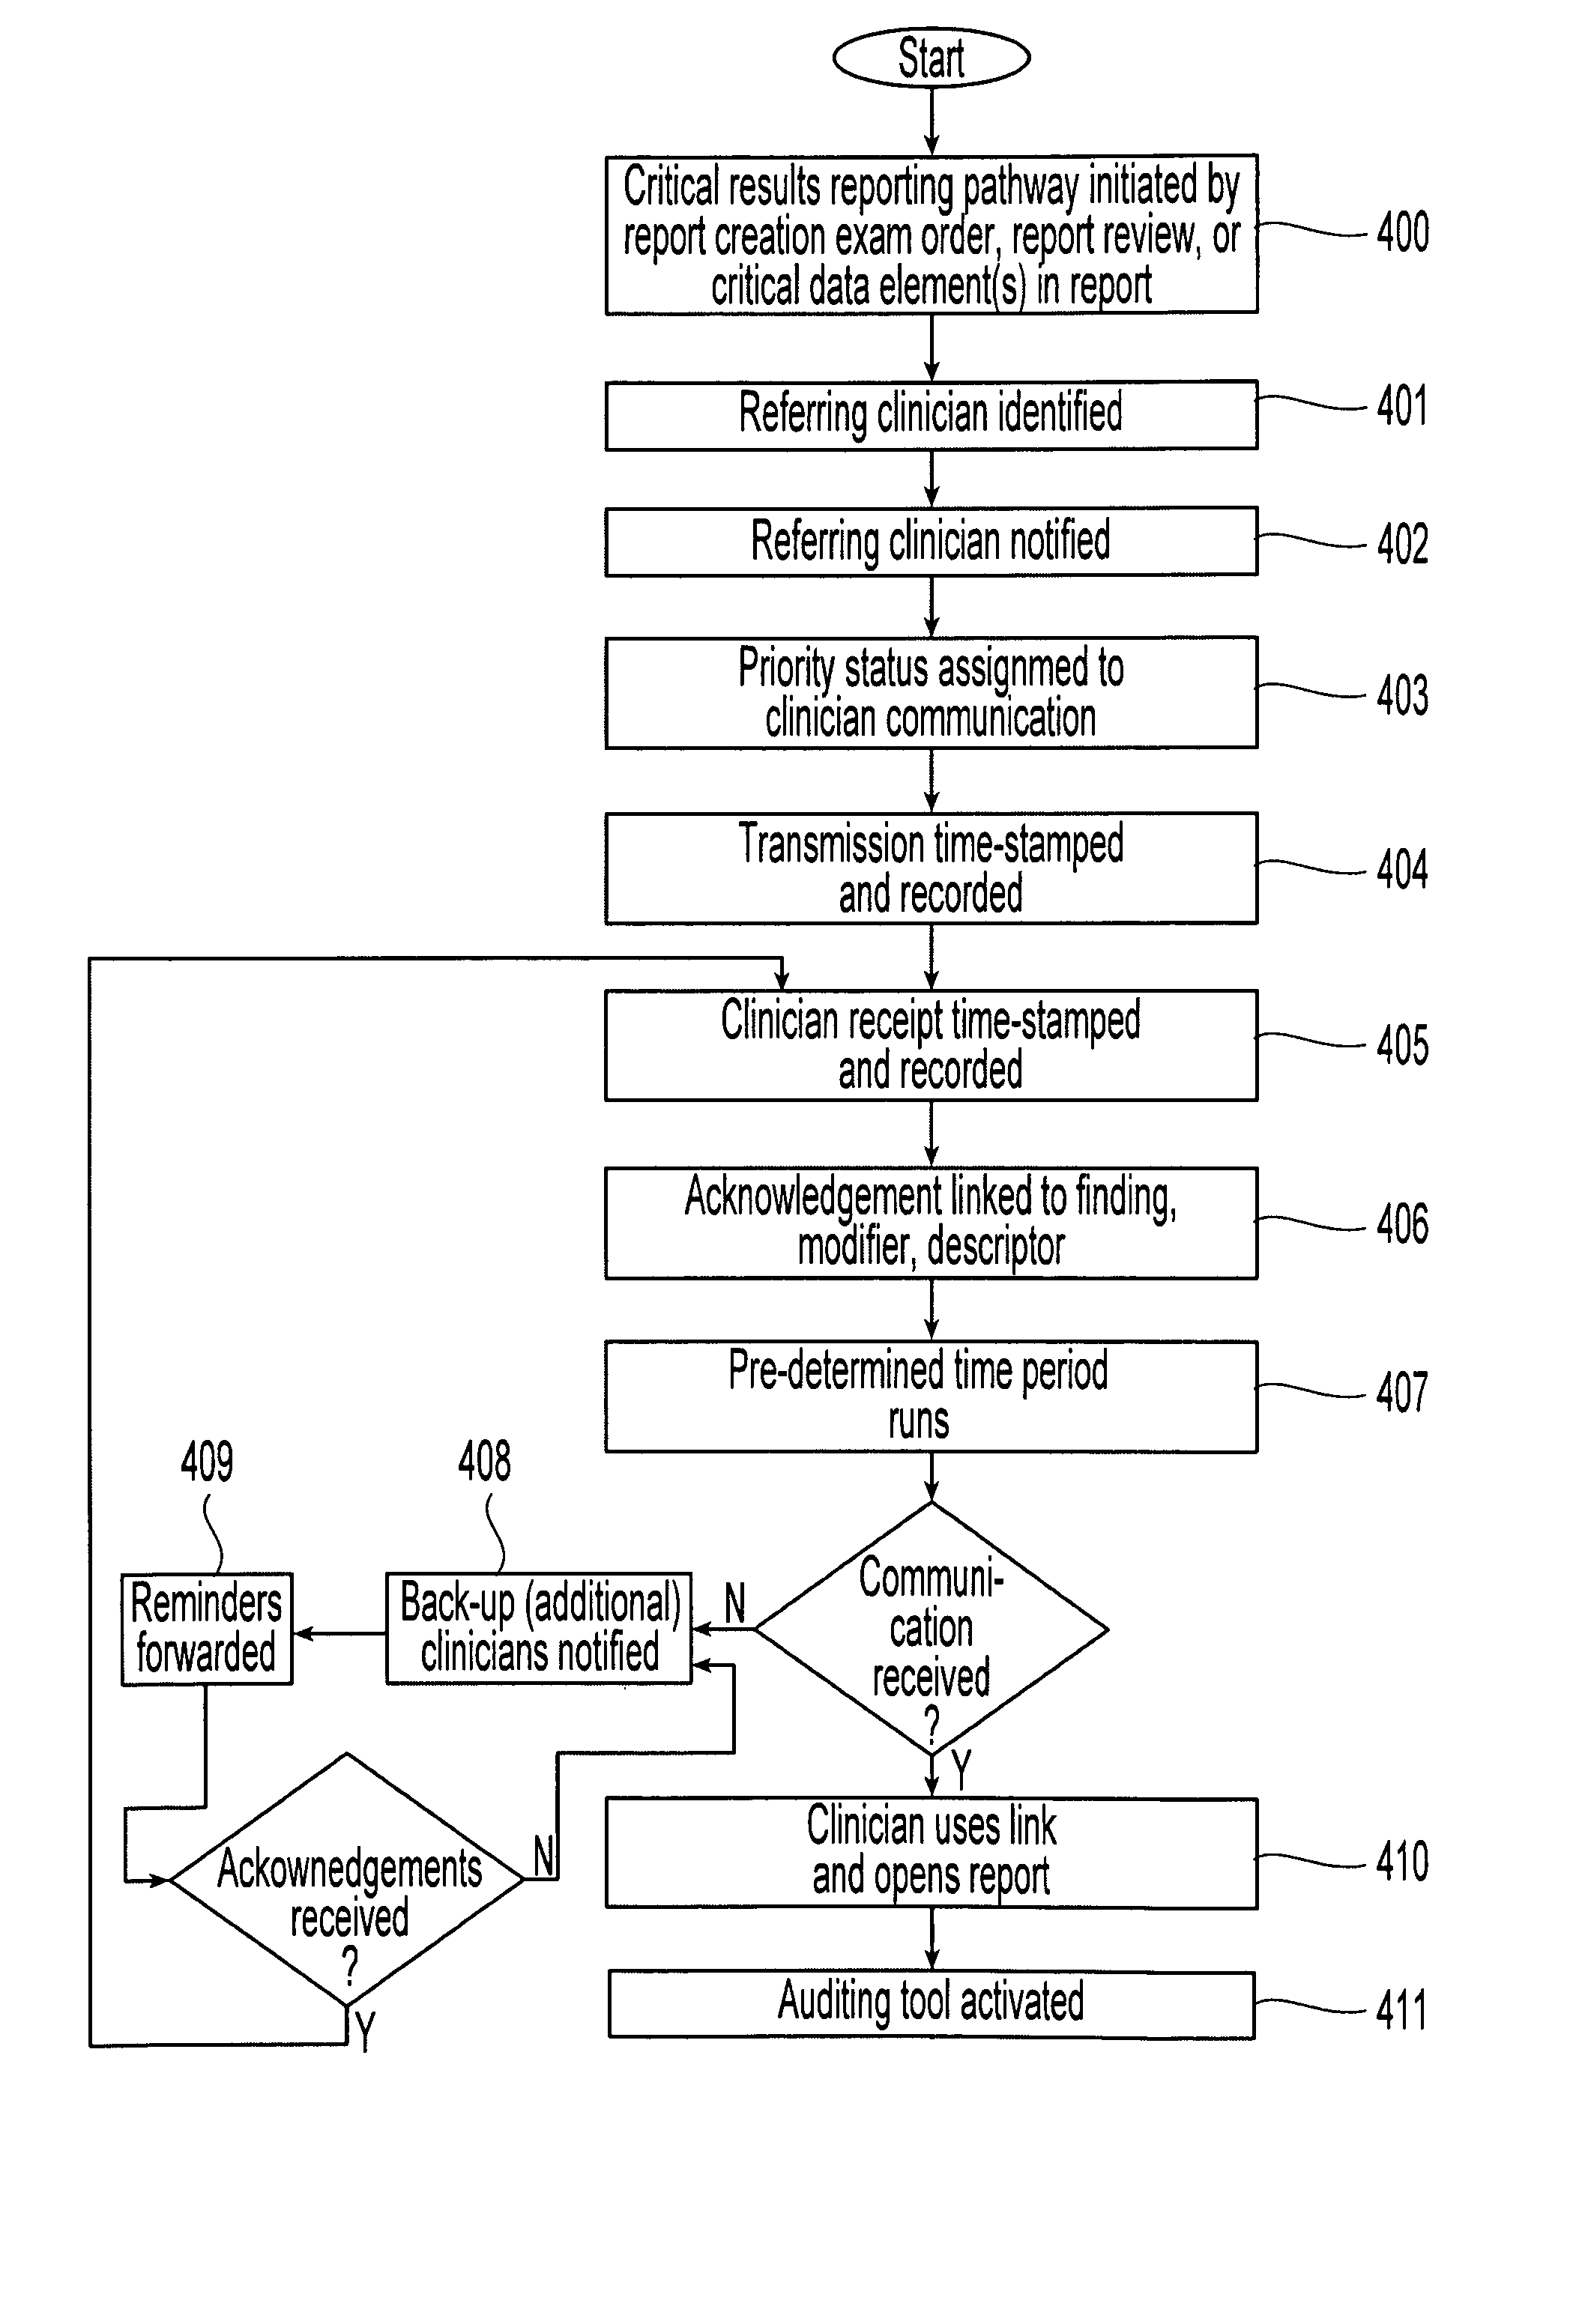 Gesture-based communication and reporting system